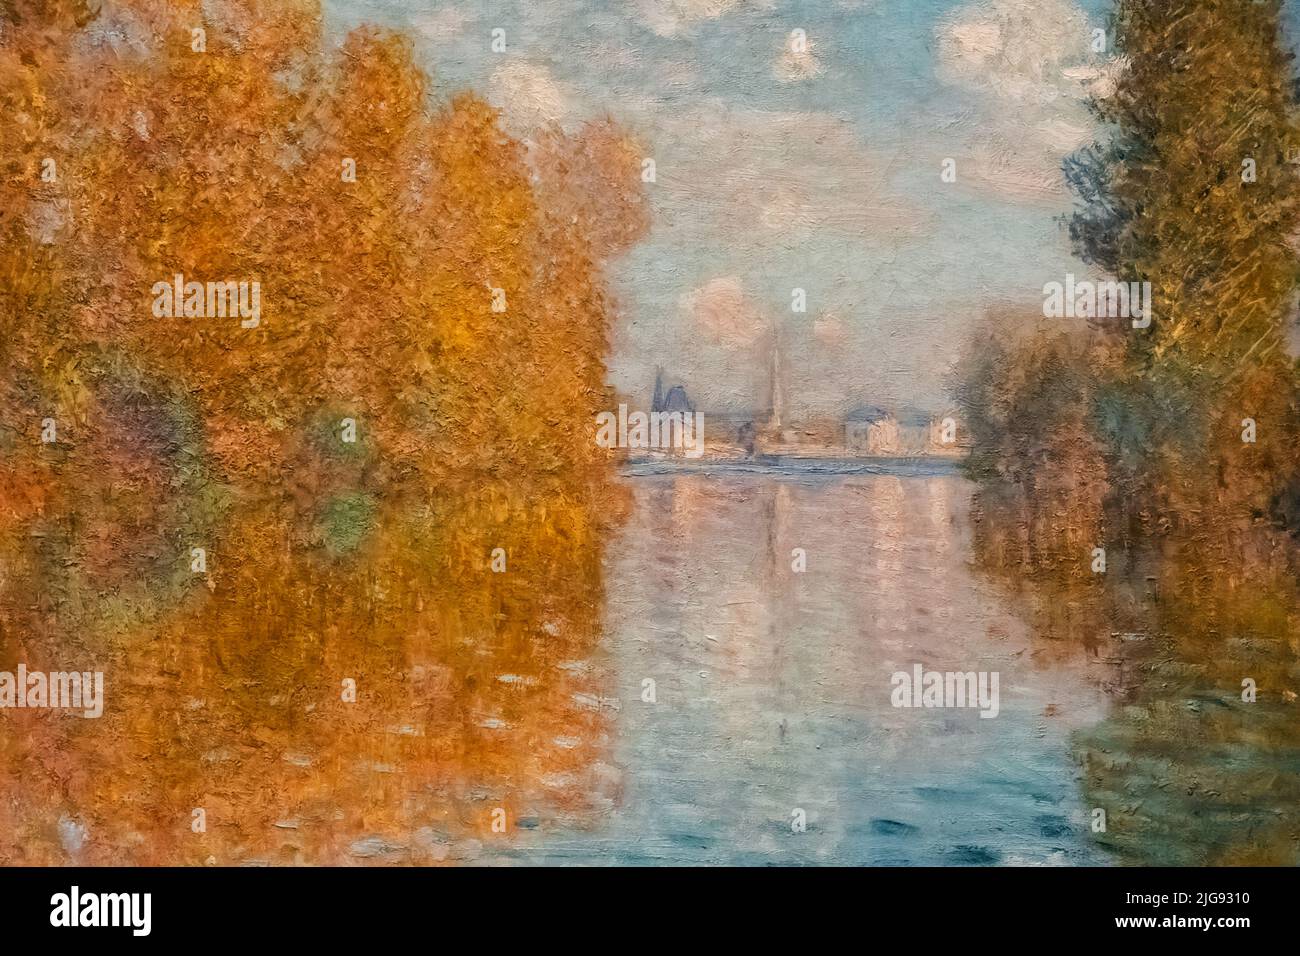 England, London, Somerset House, The Courtauld Gallery, Painting titled 'Autumn Effect at Argenteuil' by Claude Monet dated 1873 Stock Photo